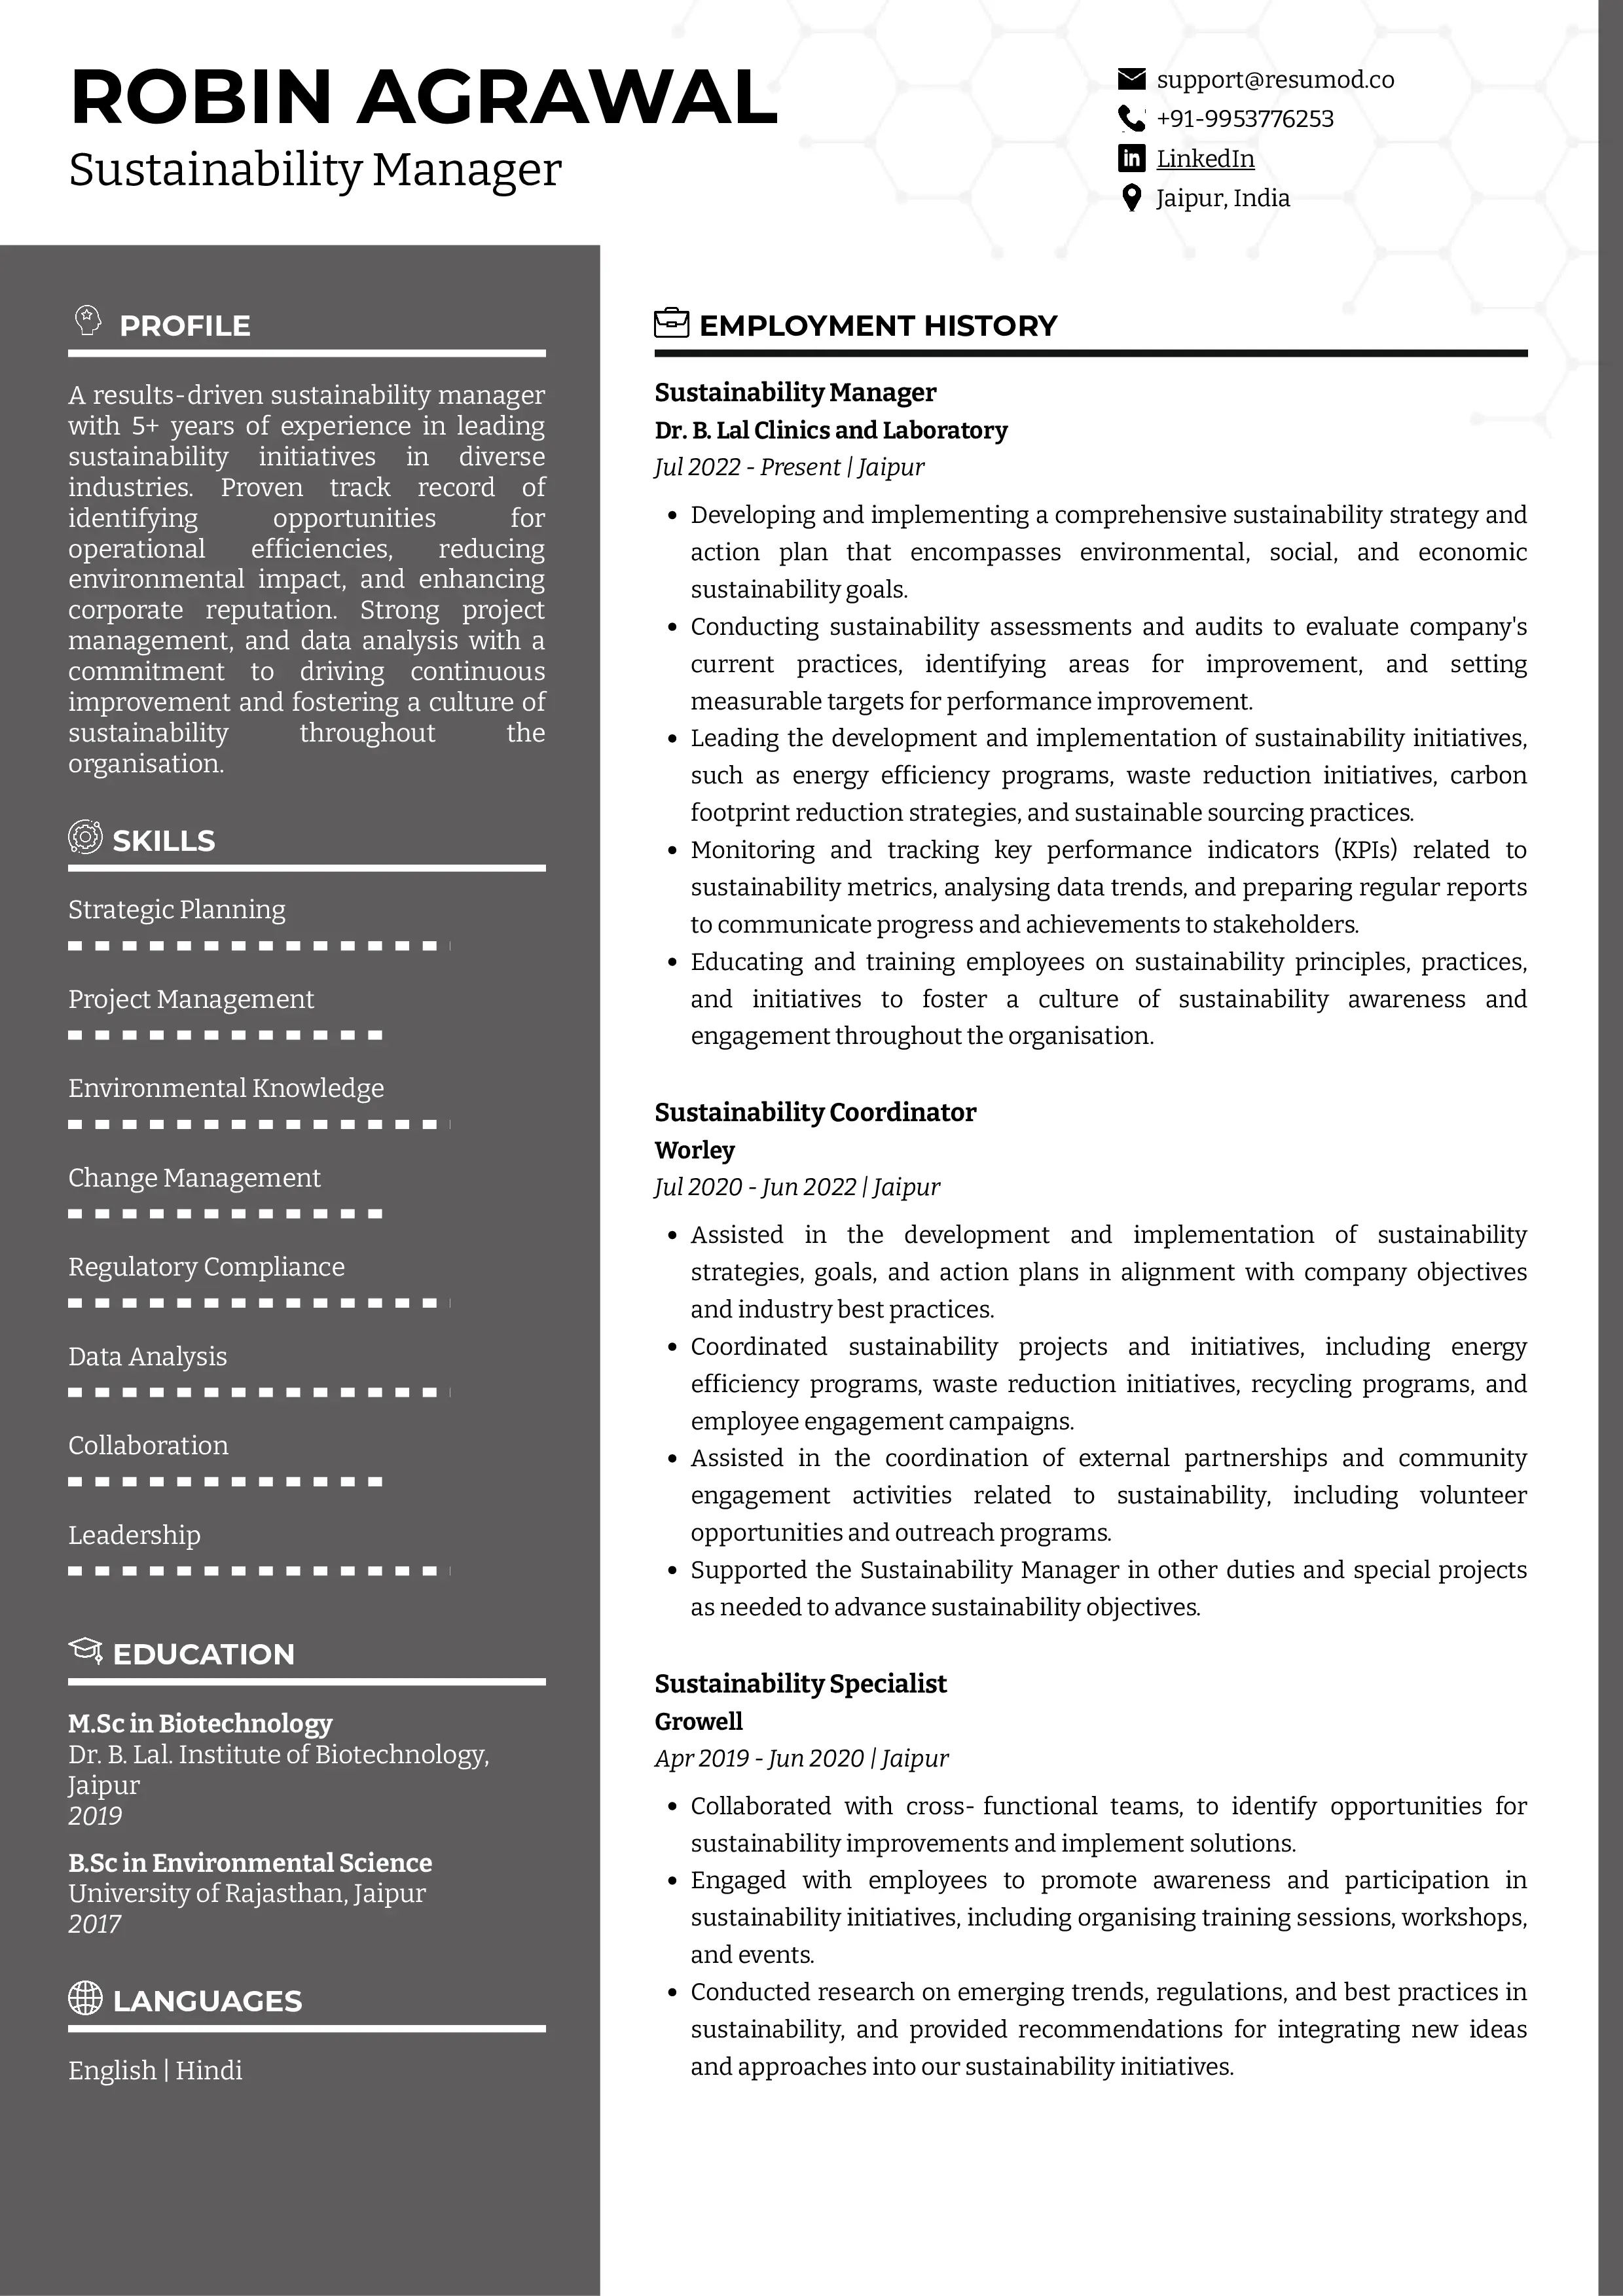 Sample Resume of Sustainability Manager | Free Resume Templates & Samples on Resumod.co